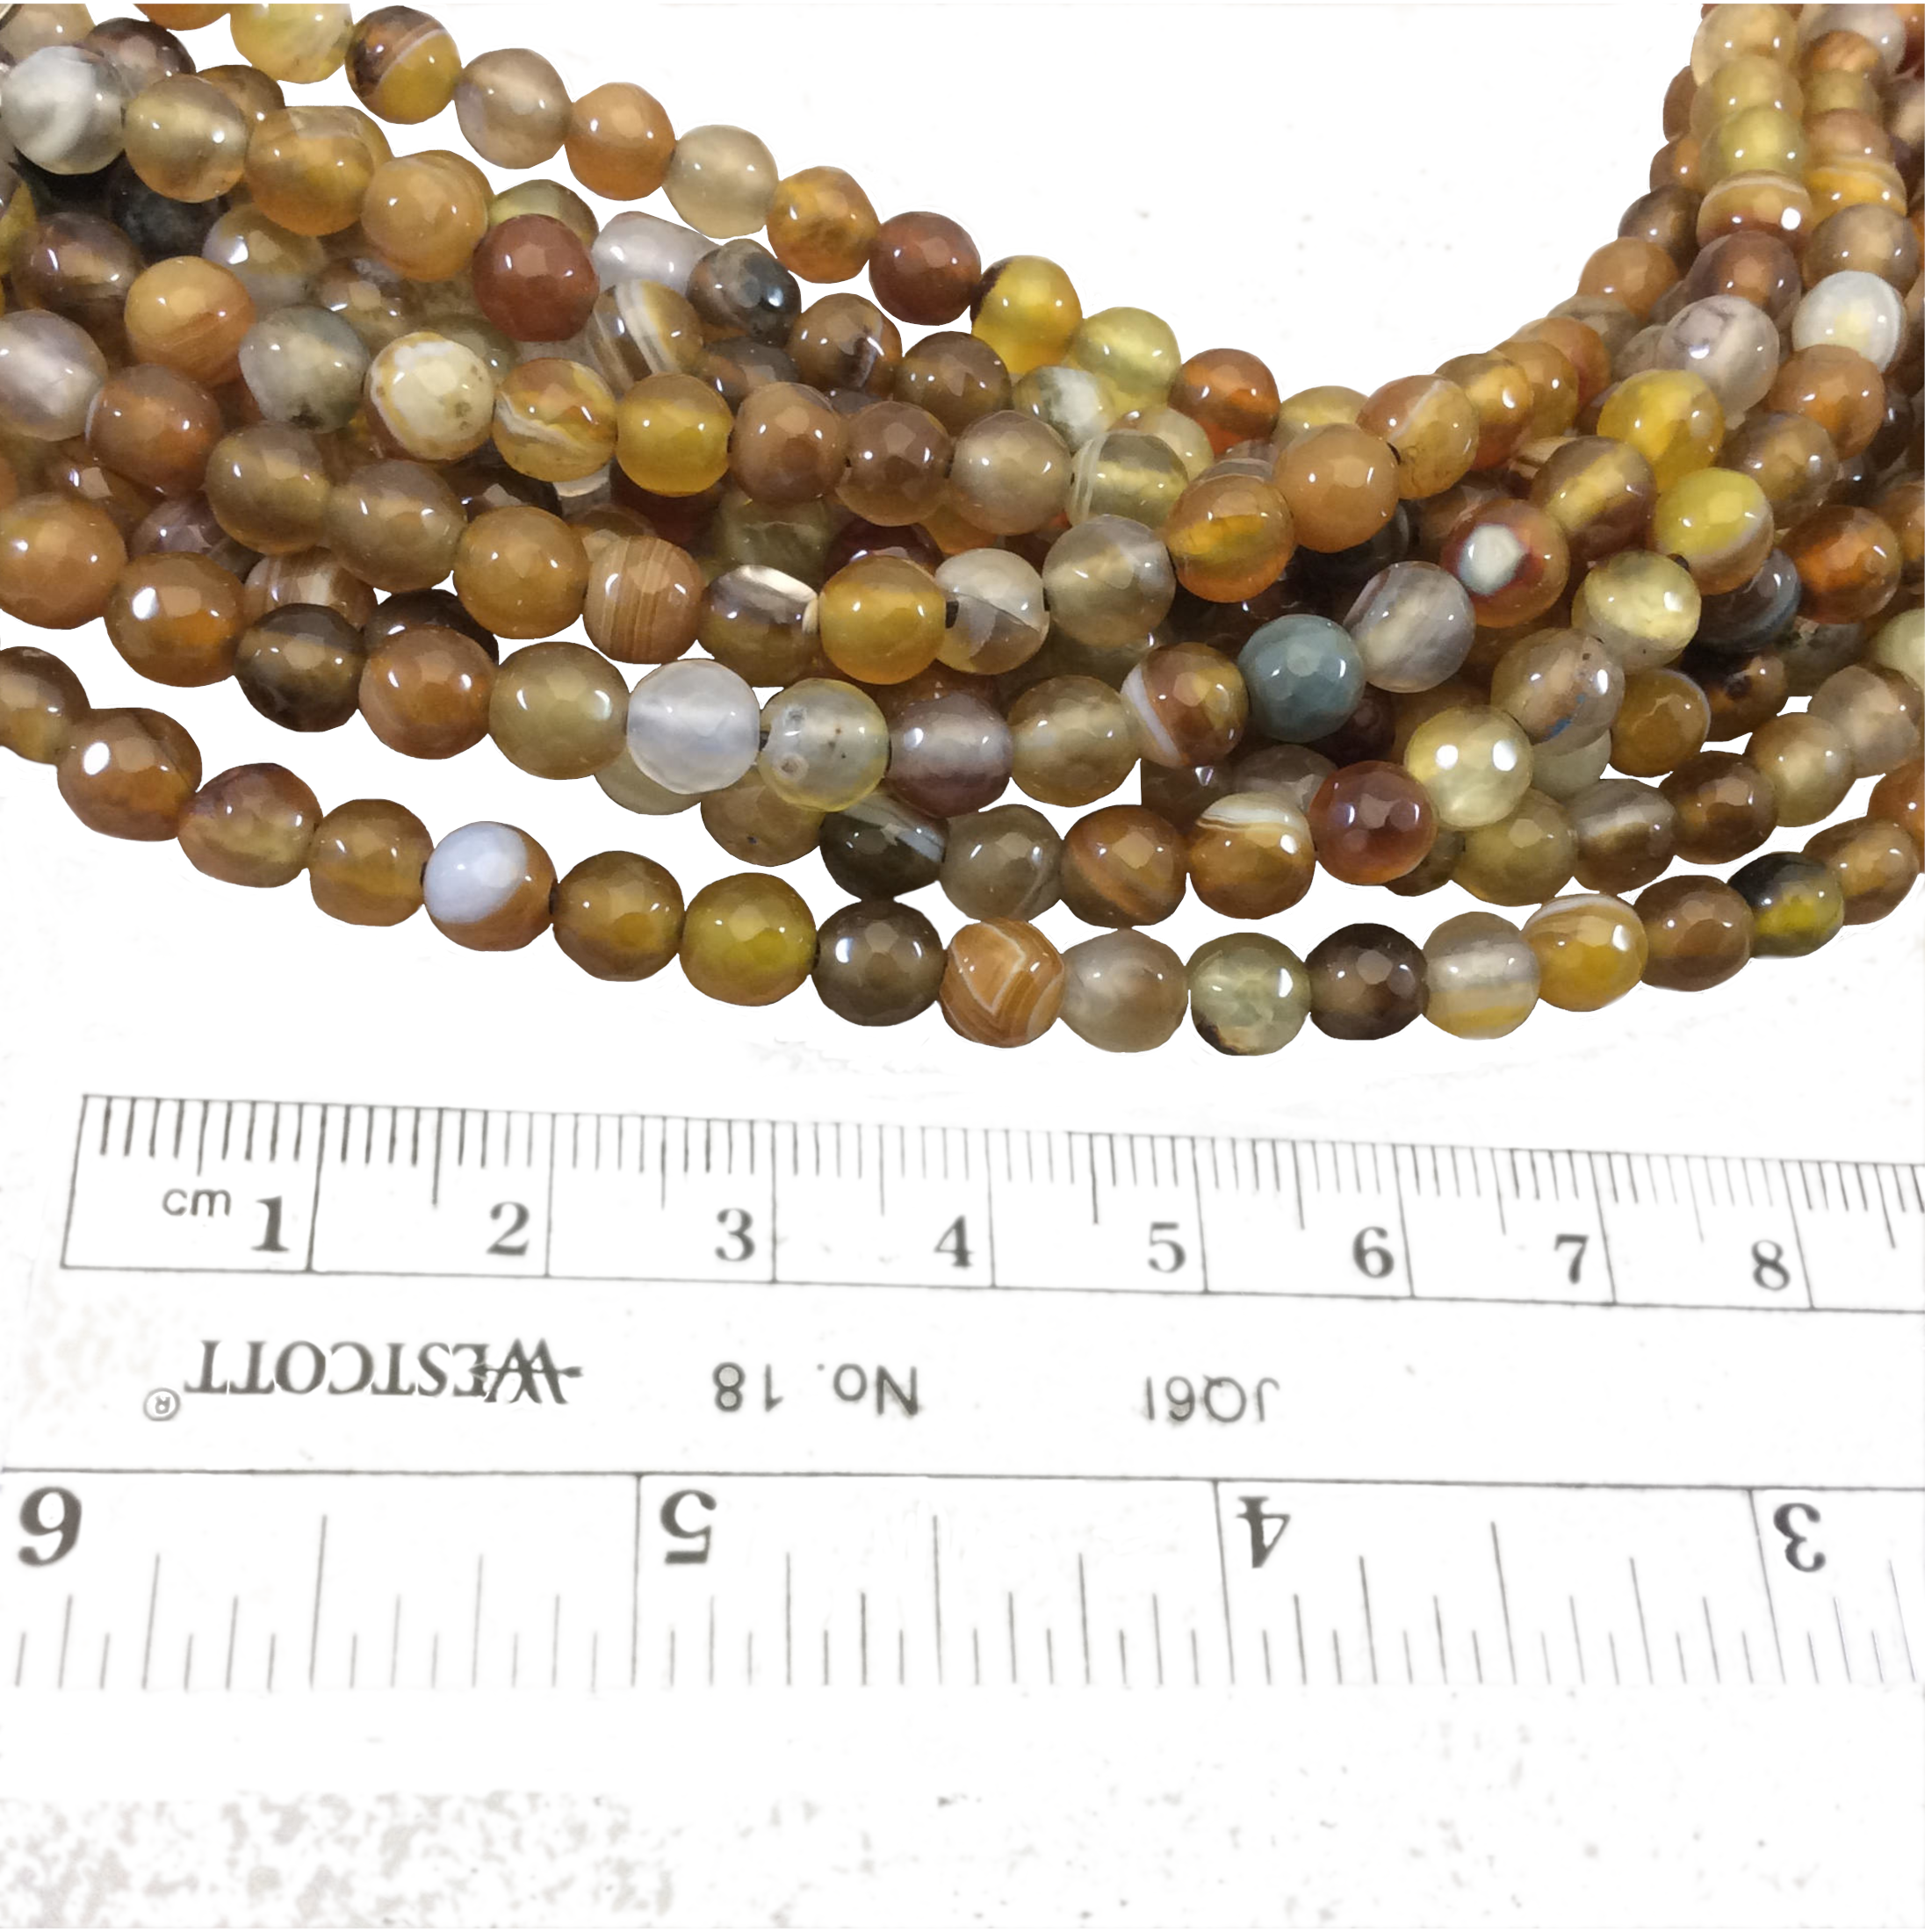 Natural Brown Agate Beads, Brown Agate Faceted 12 mm Round Shape Beads